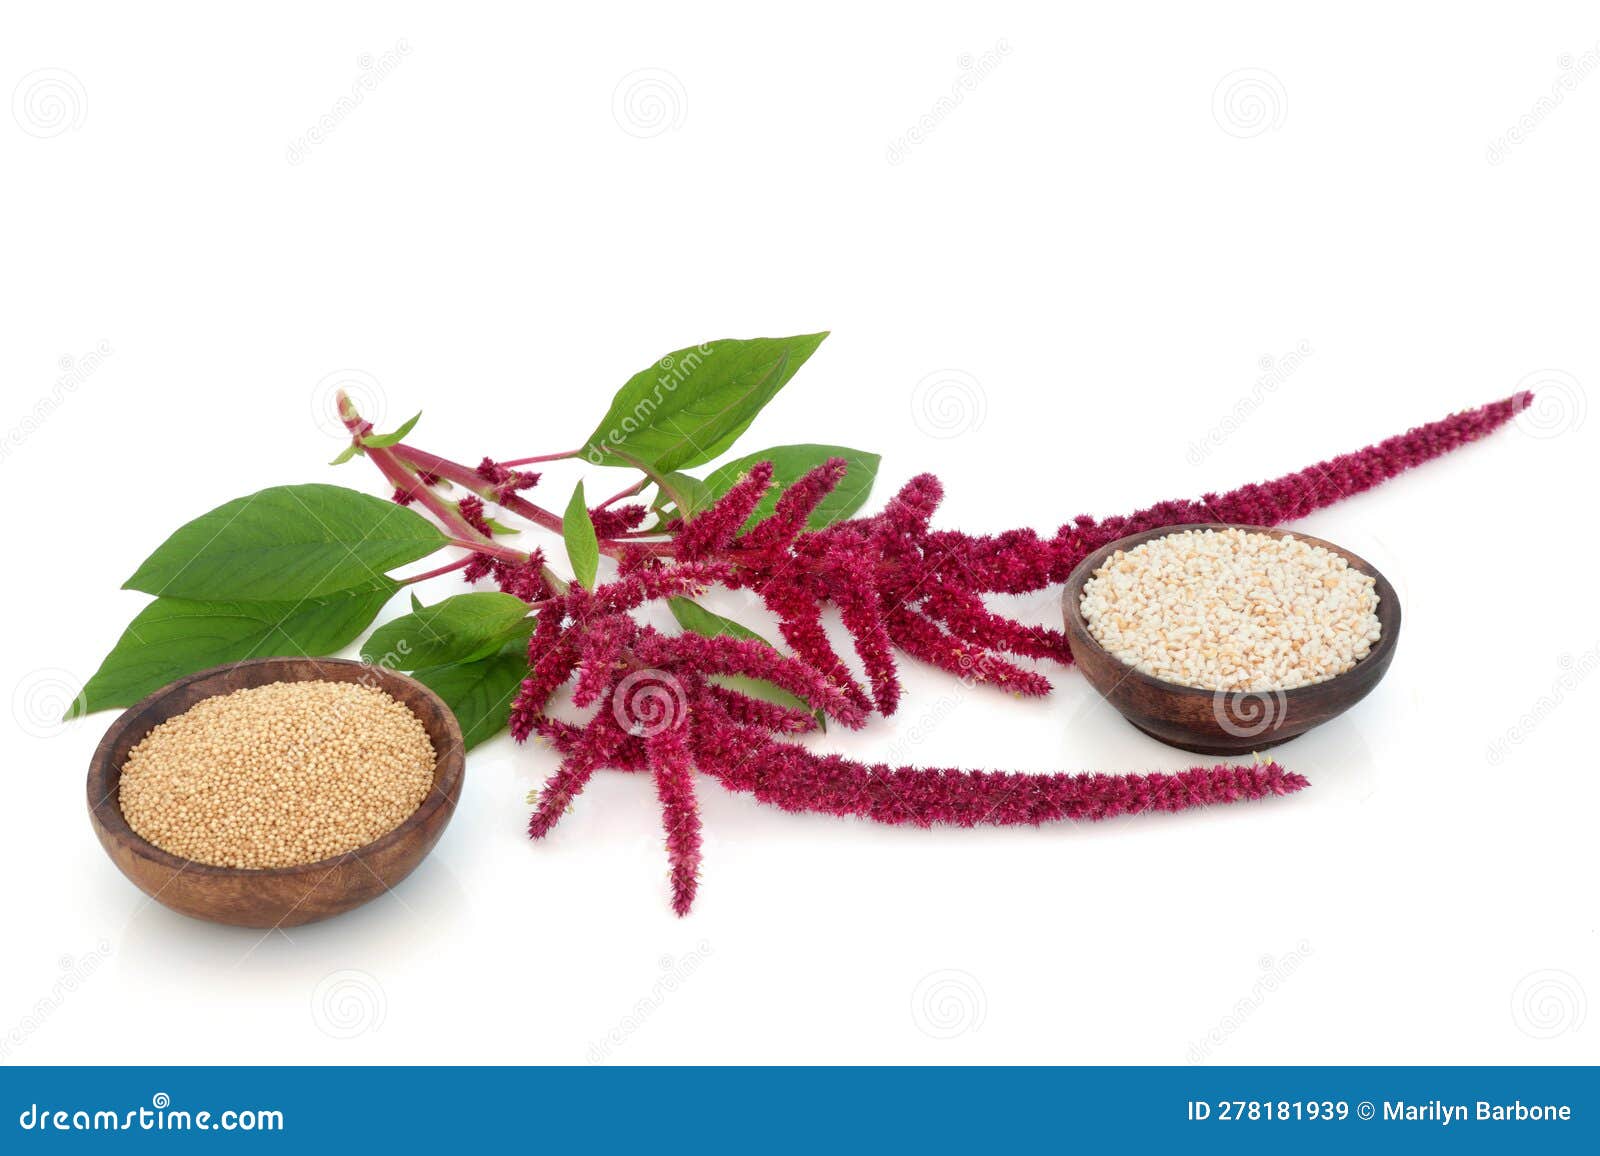 Amaranthus Plant Dried Seed and Puffed Grain Stock Image - Image of ...